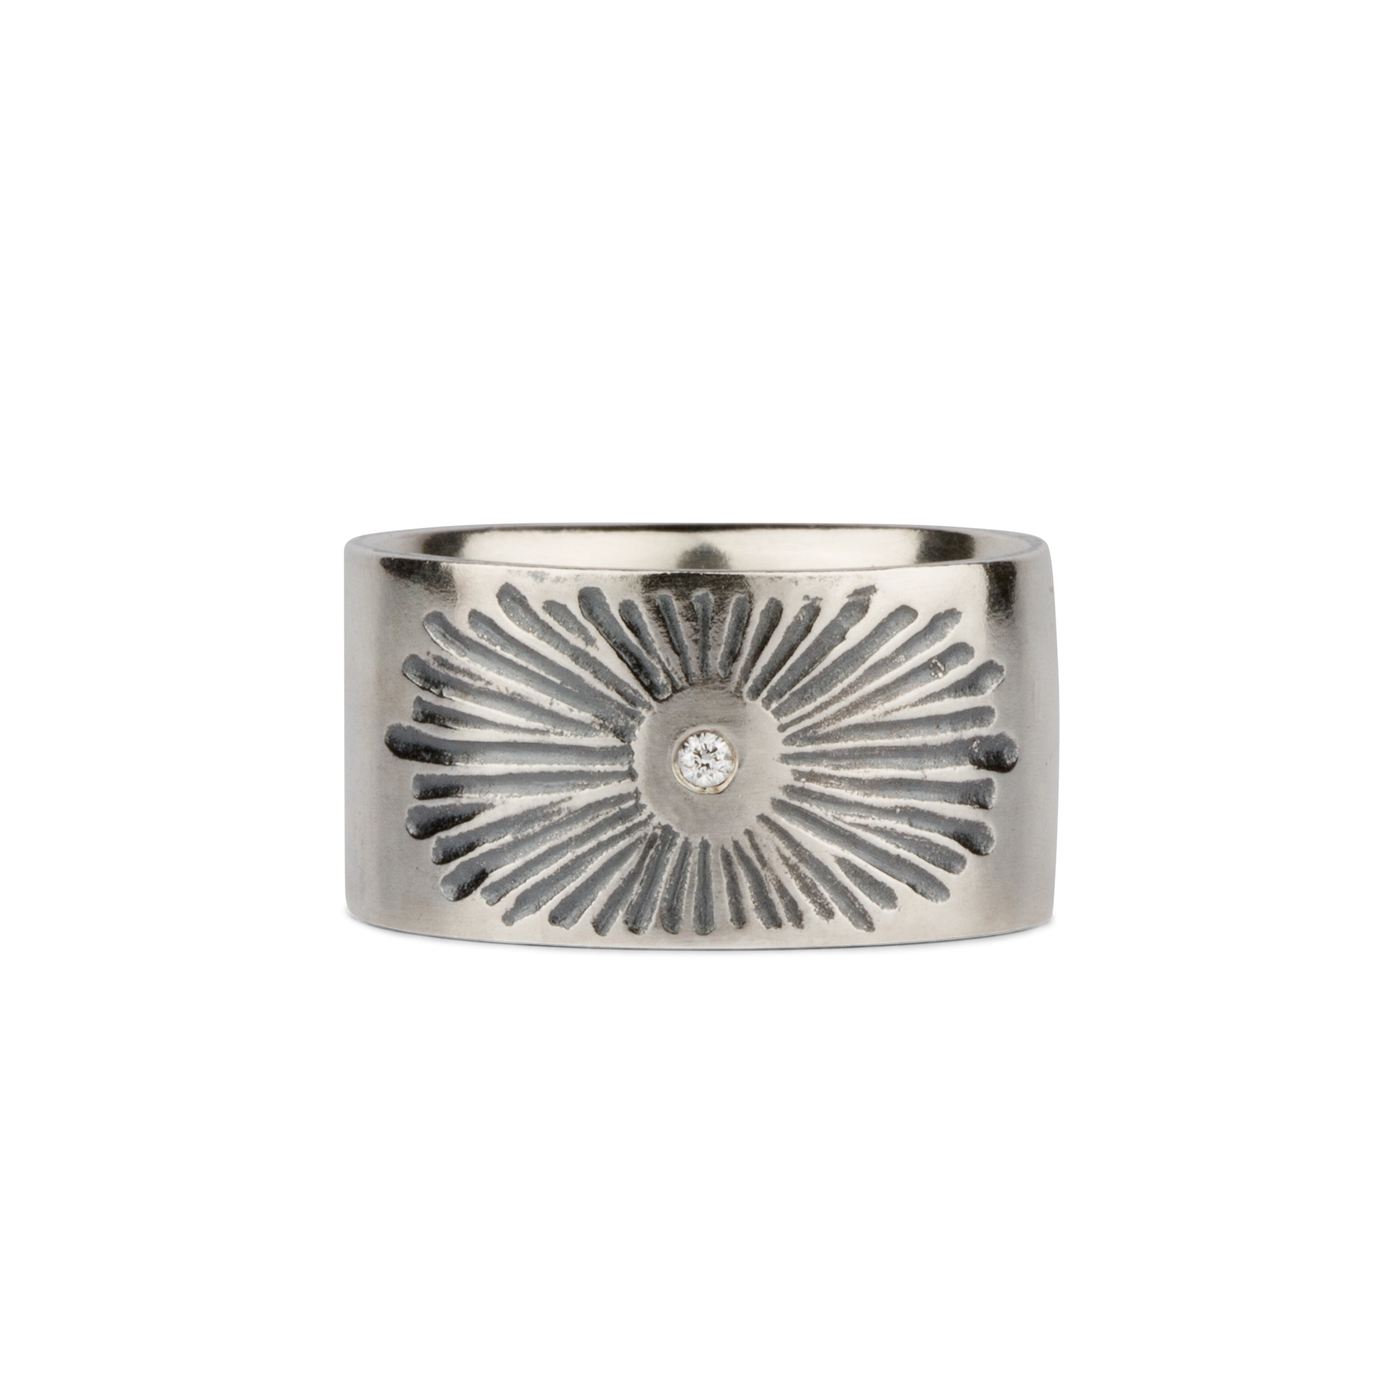 Oxidized silver wide band with single diamond and a carved sunburst design on a white background by Corey Egan